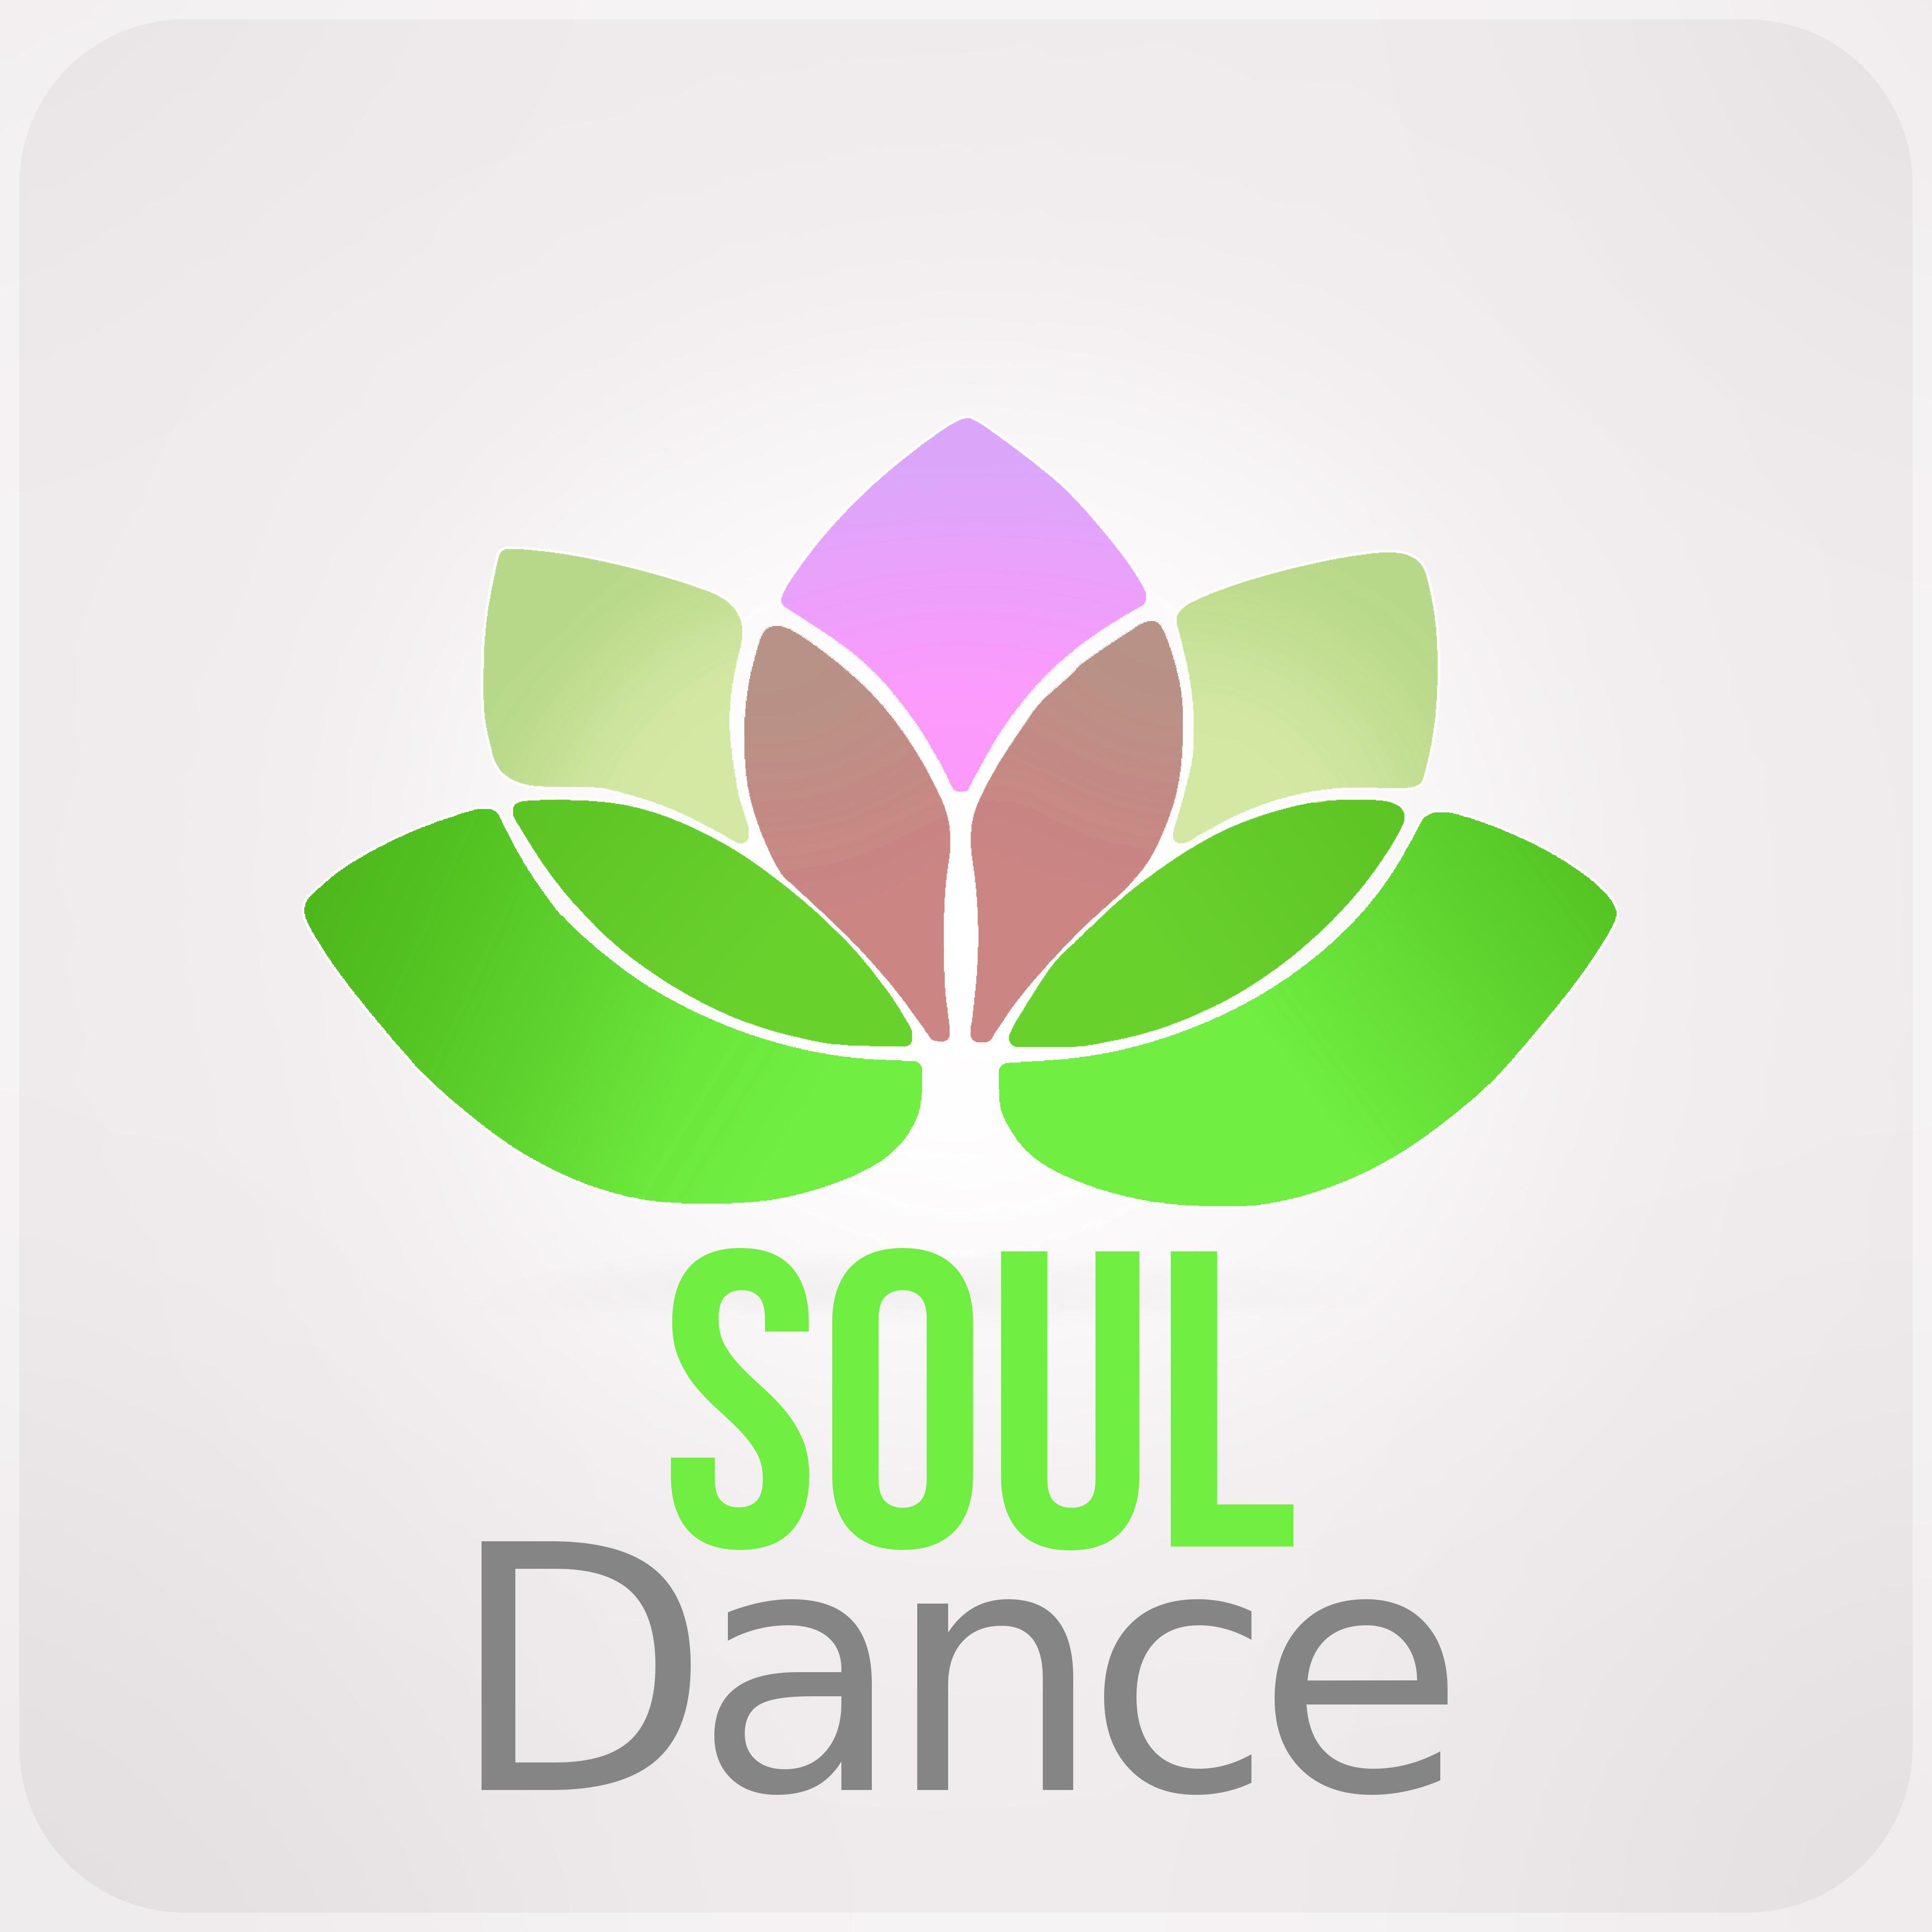 Soul Dance - Yoga Relaxing Meditation Music, Connect Your Body, Mind and Soul, Spirited Sensual Sounds for Yoga Practice and Pilates Exercises, Instrumental and Nature Sounds